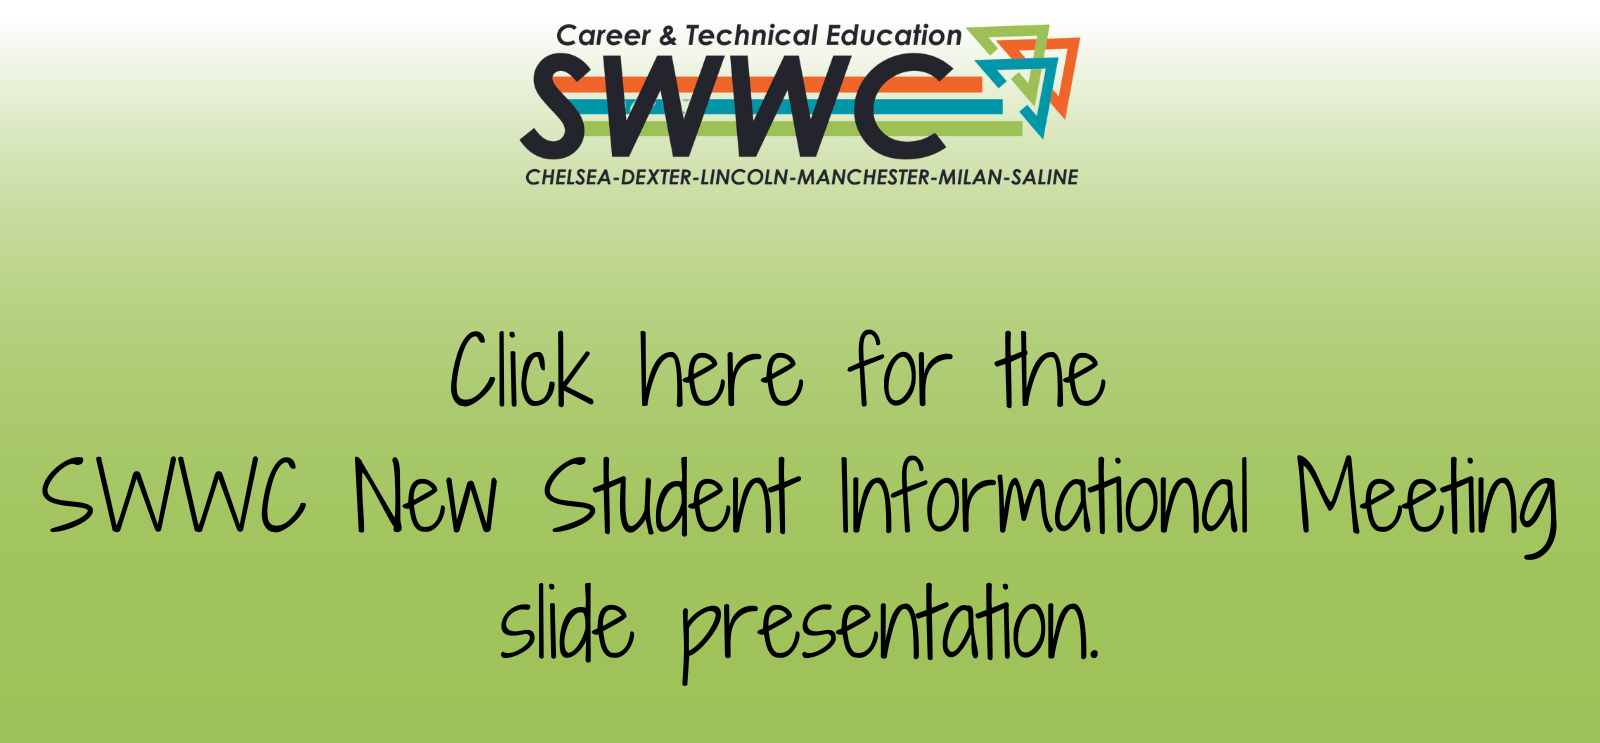 New Student Information Meeting